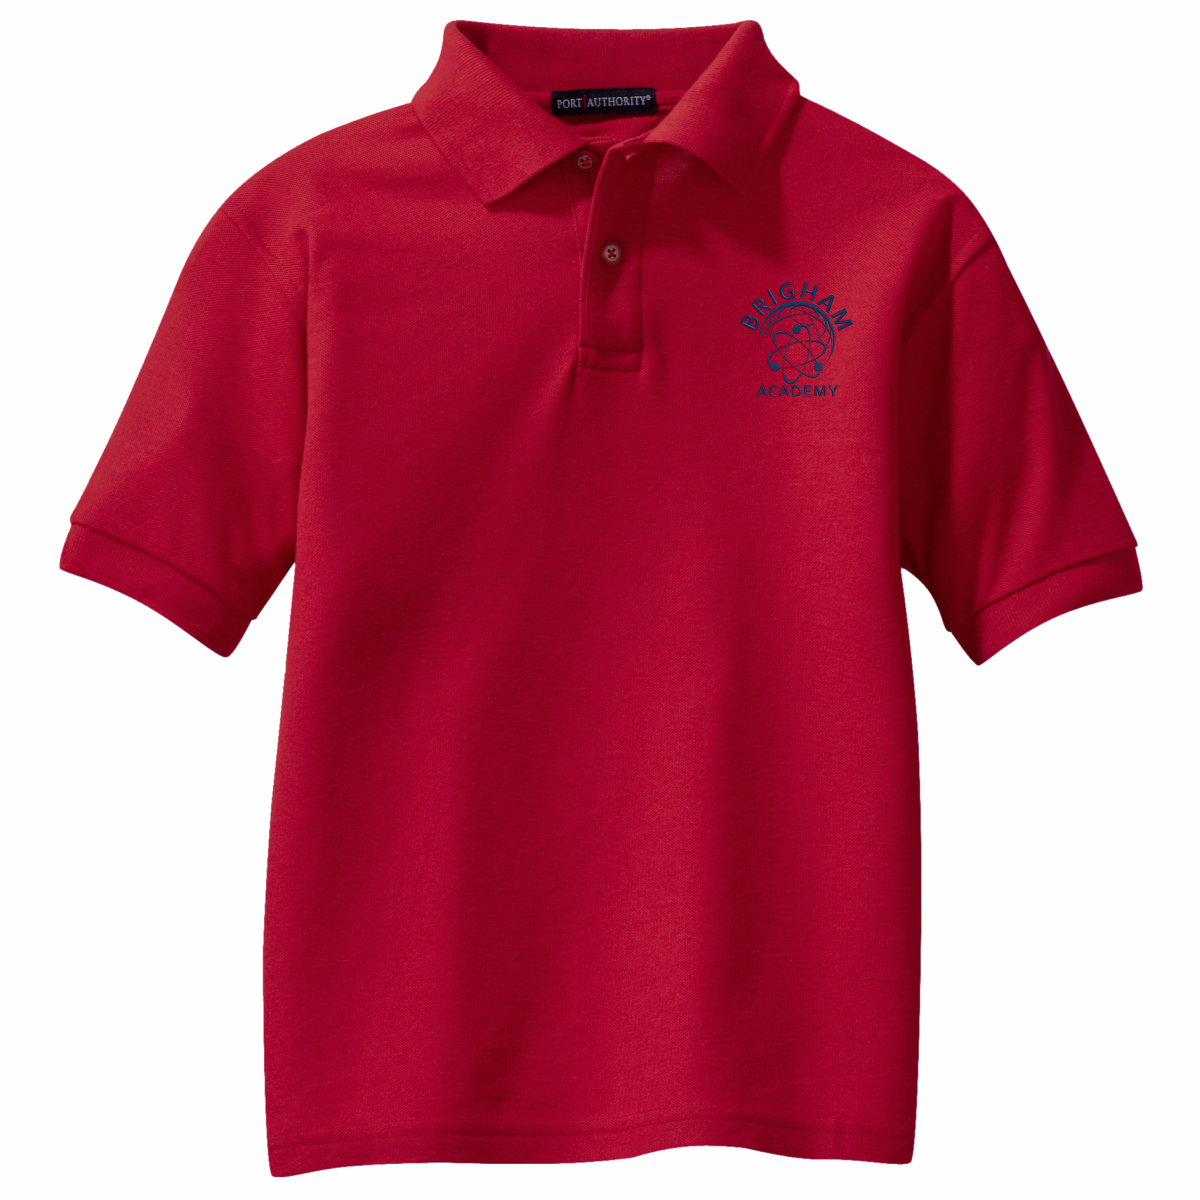 Brigham Academy YOUTH SIZE - Port Authority® Classic Pique Polo - RED